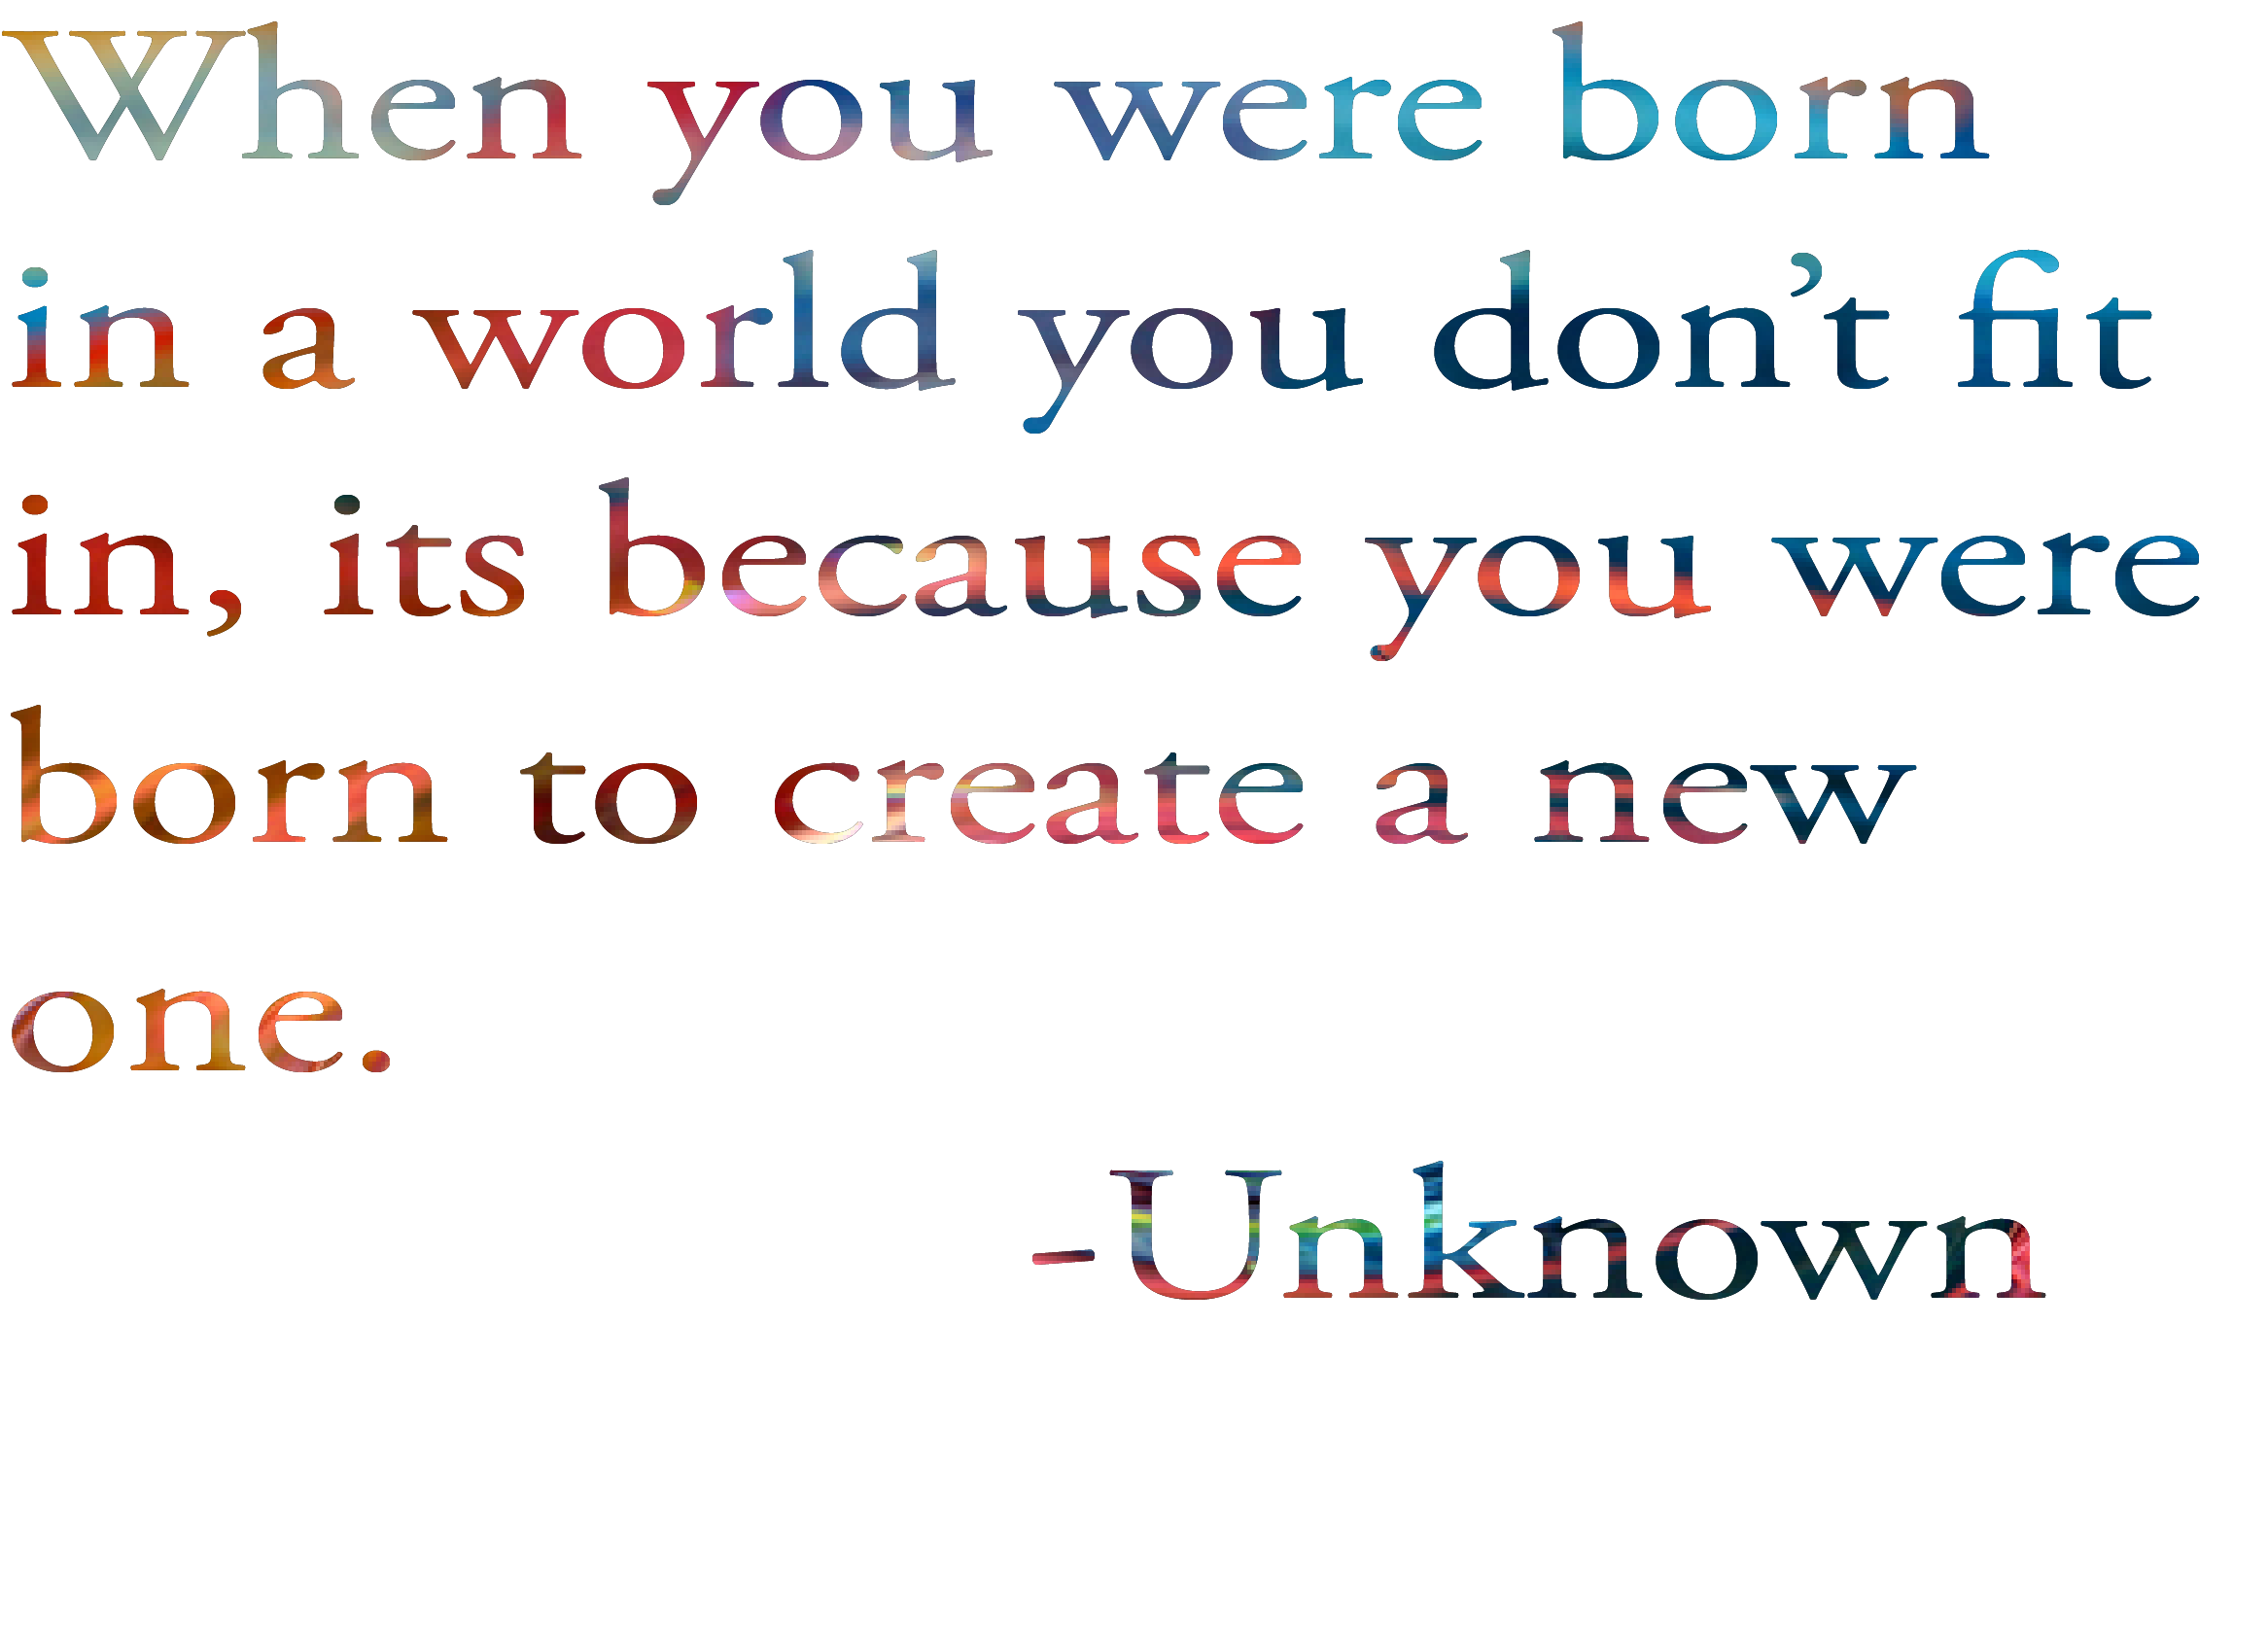 "When you were born in a world you don't fit in, its because you were born to create a new one." -Unknown motivational quote